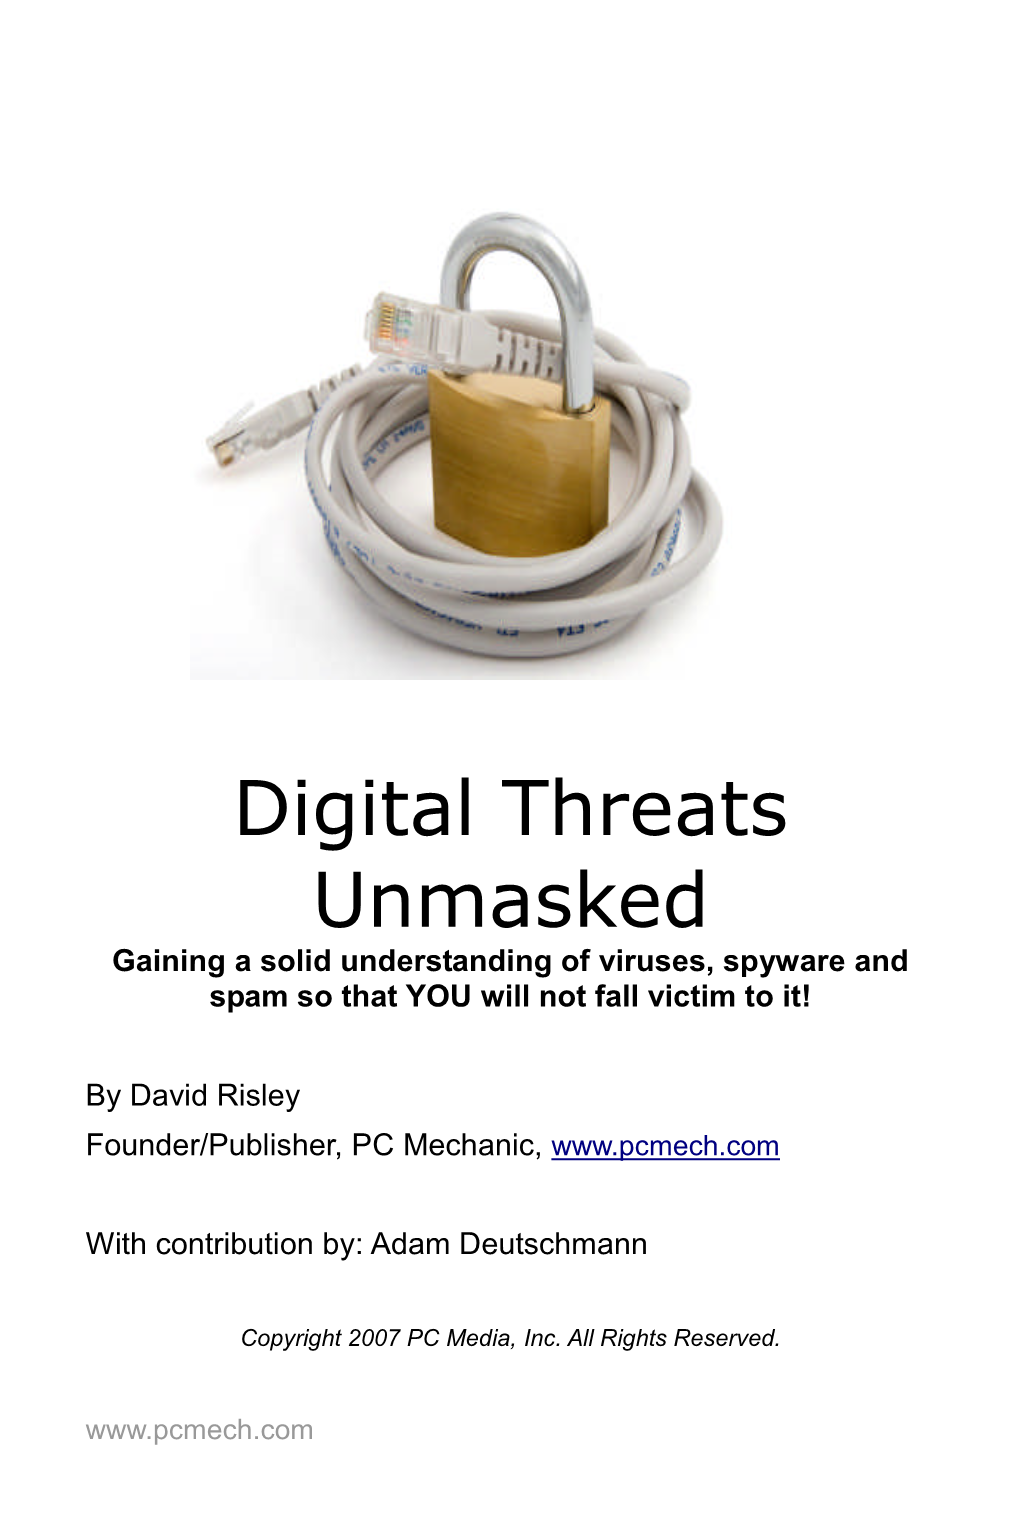 Digital Threats Unmasked Gaining a Solid Understanding of Viruses, Spyware and Spam So That YOU Will Not Fall Victim to It!